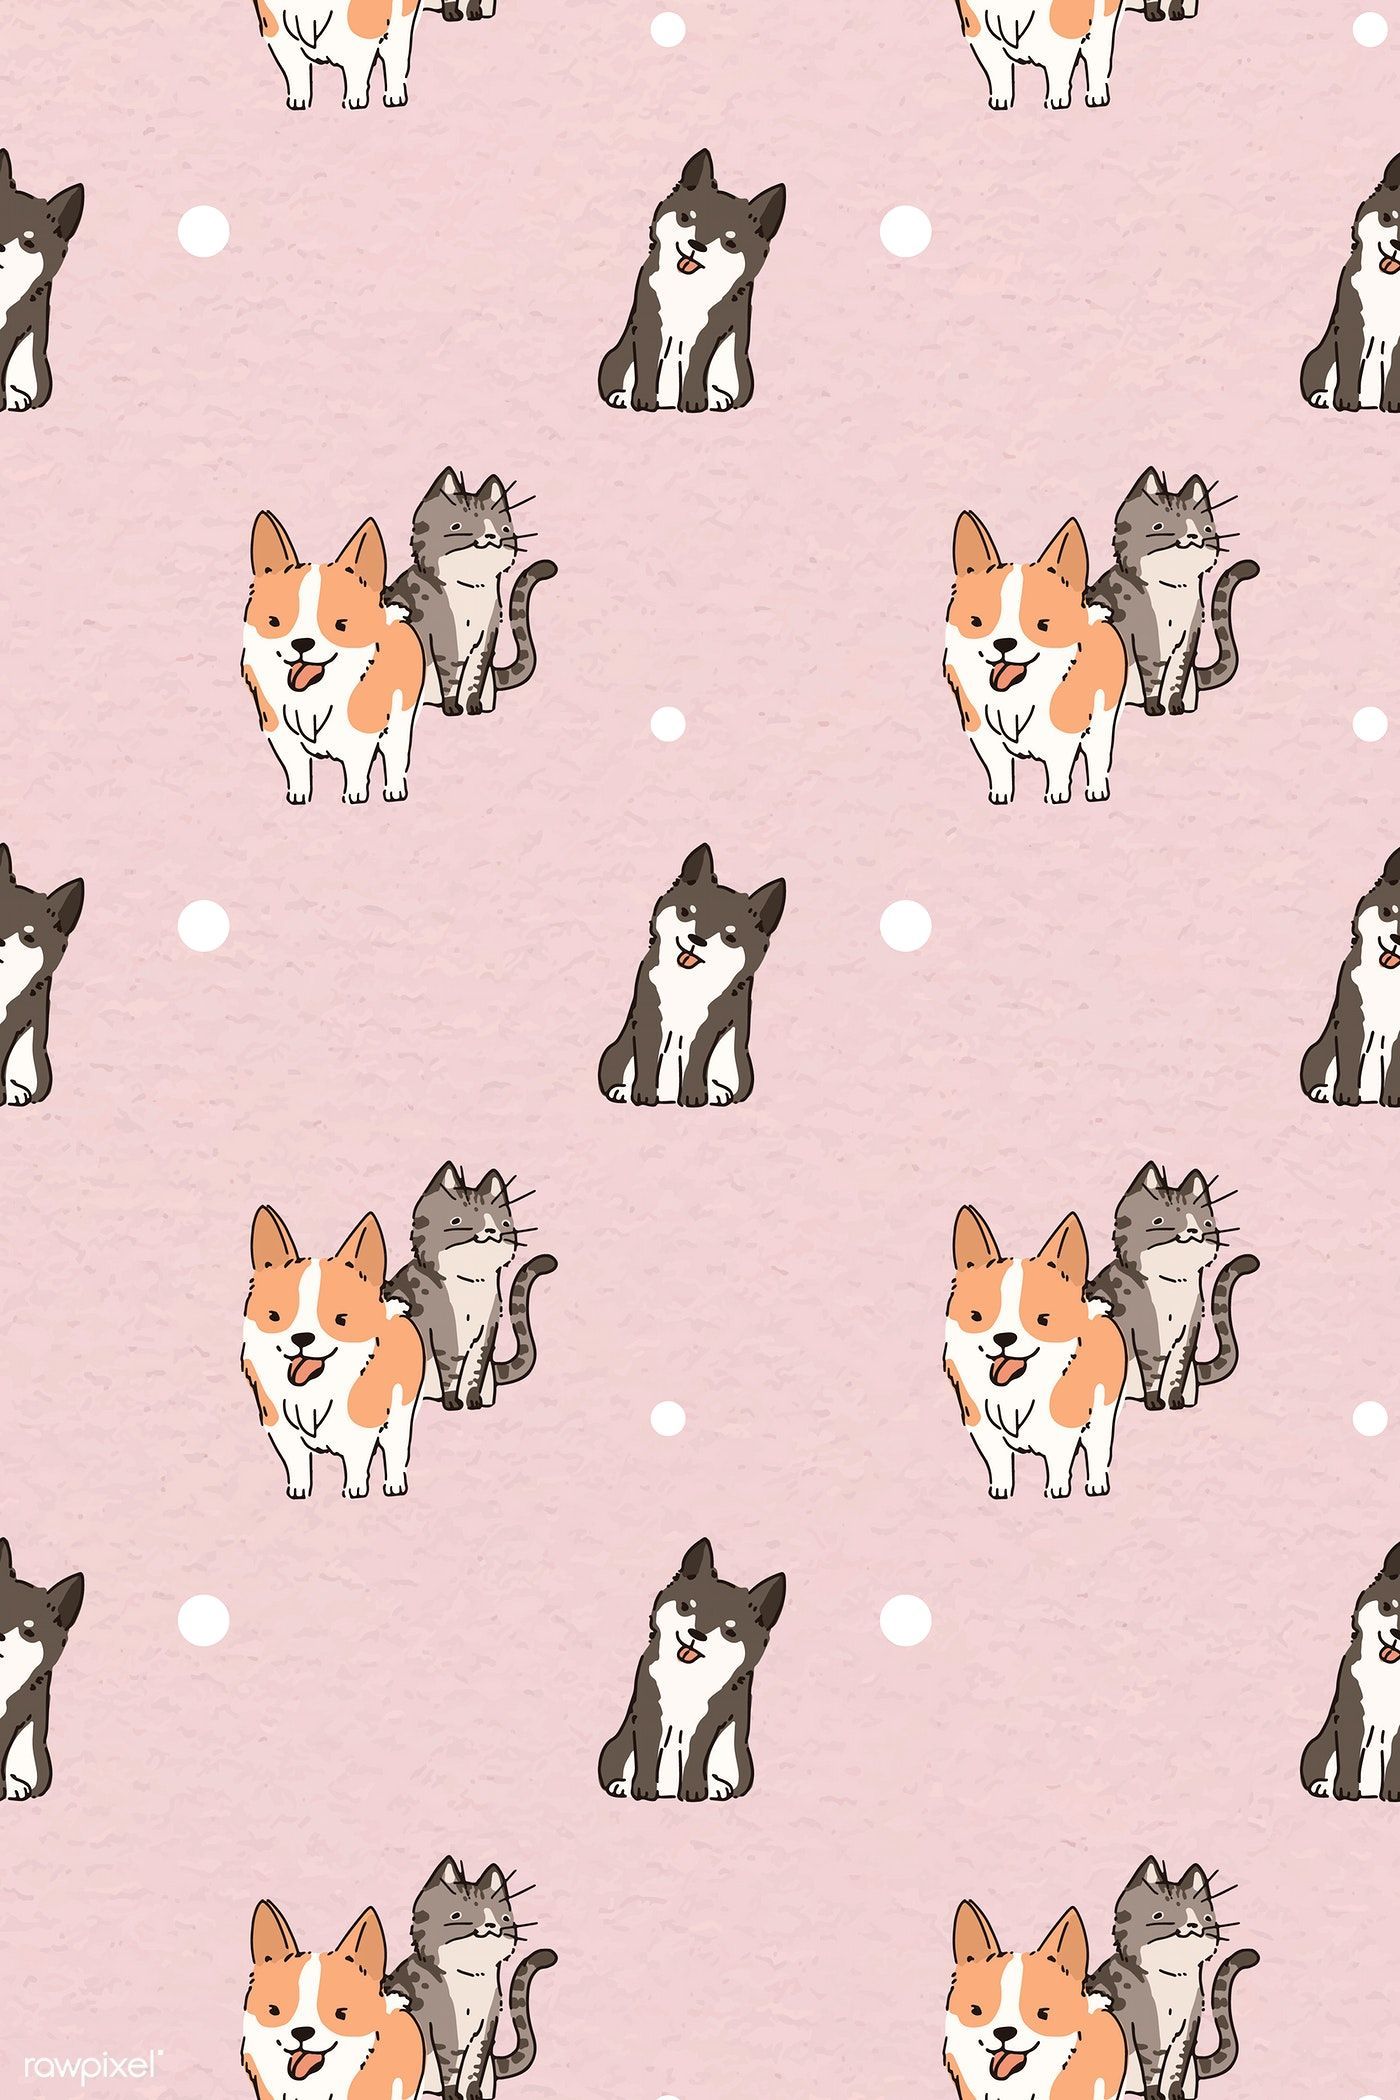 Cute Cartoon Dogs And Cats Wallpapers - Wallpaper Cave